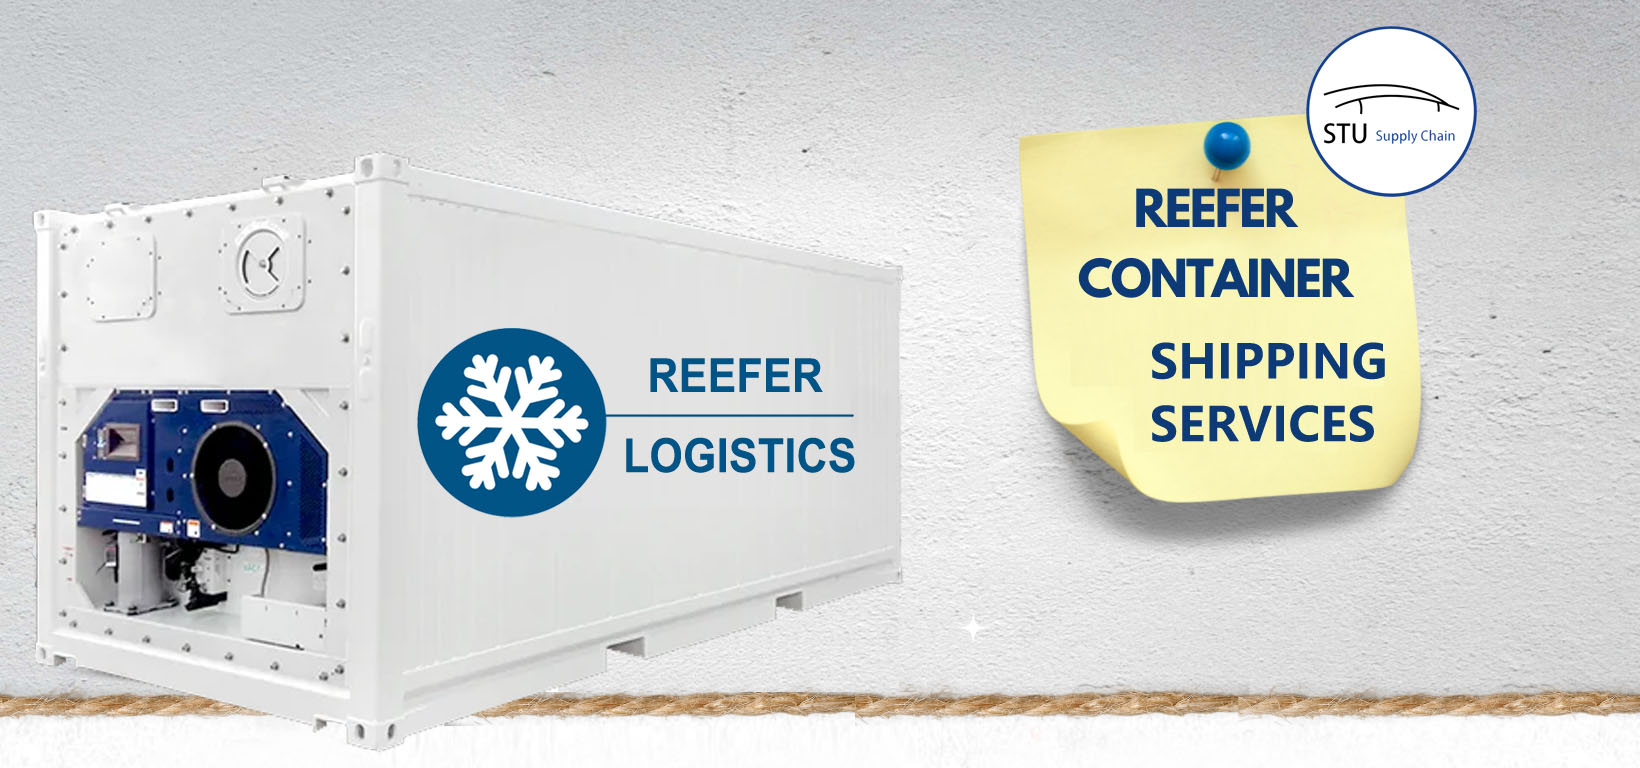 reefer container shipping services